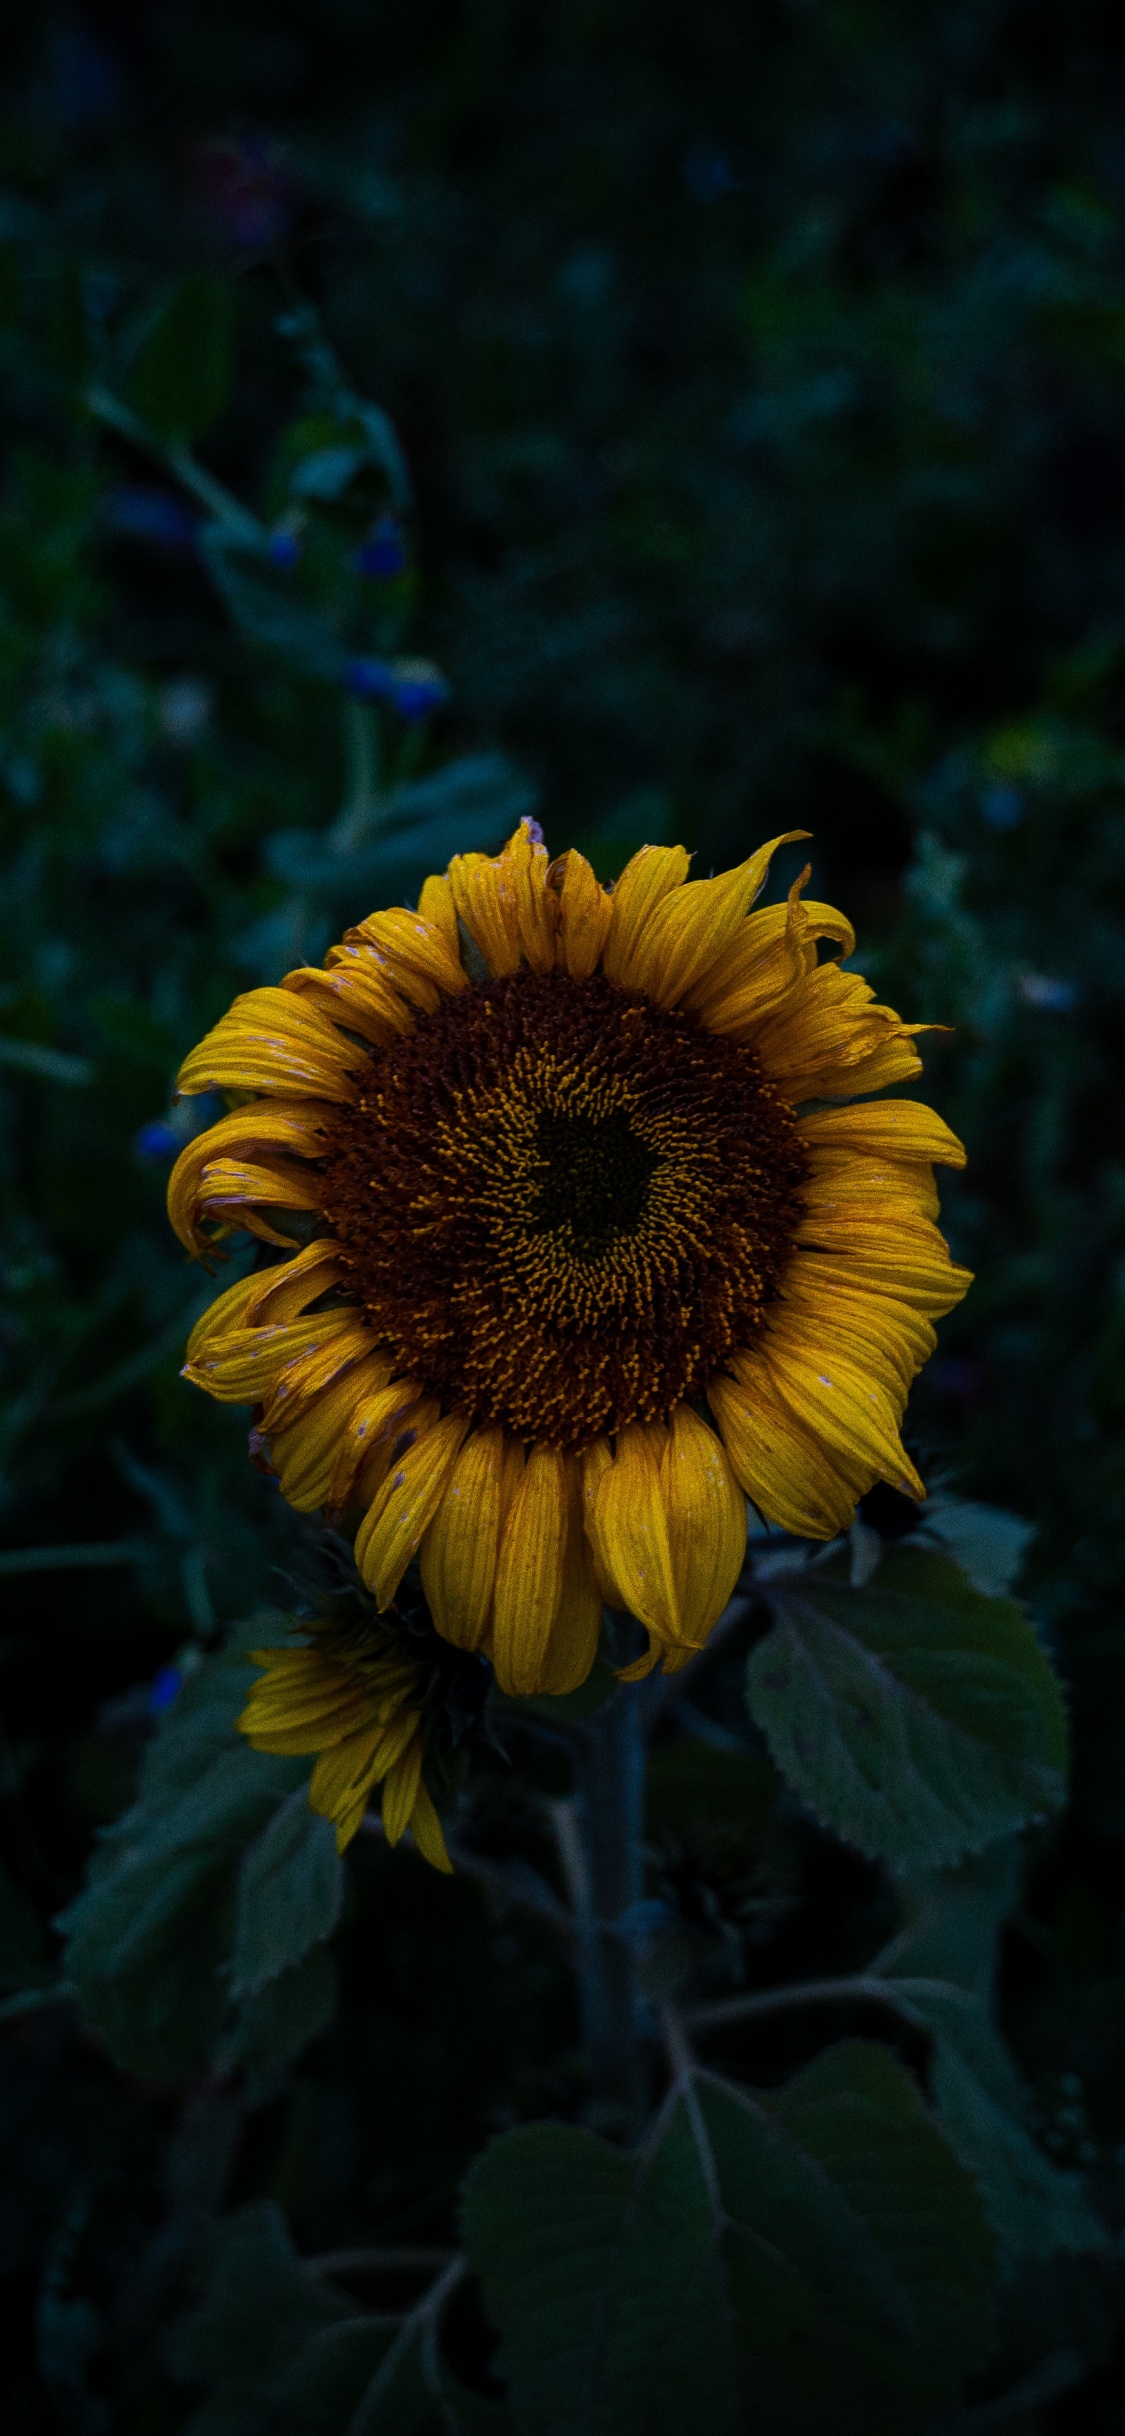 Yellow Sunflower in Bloom During Daytime. Wallpaper in 1125x2436 Resolution